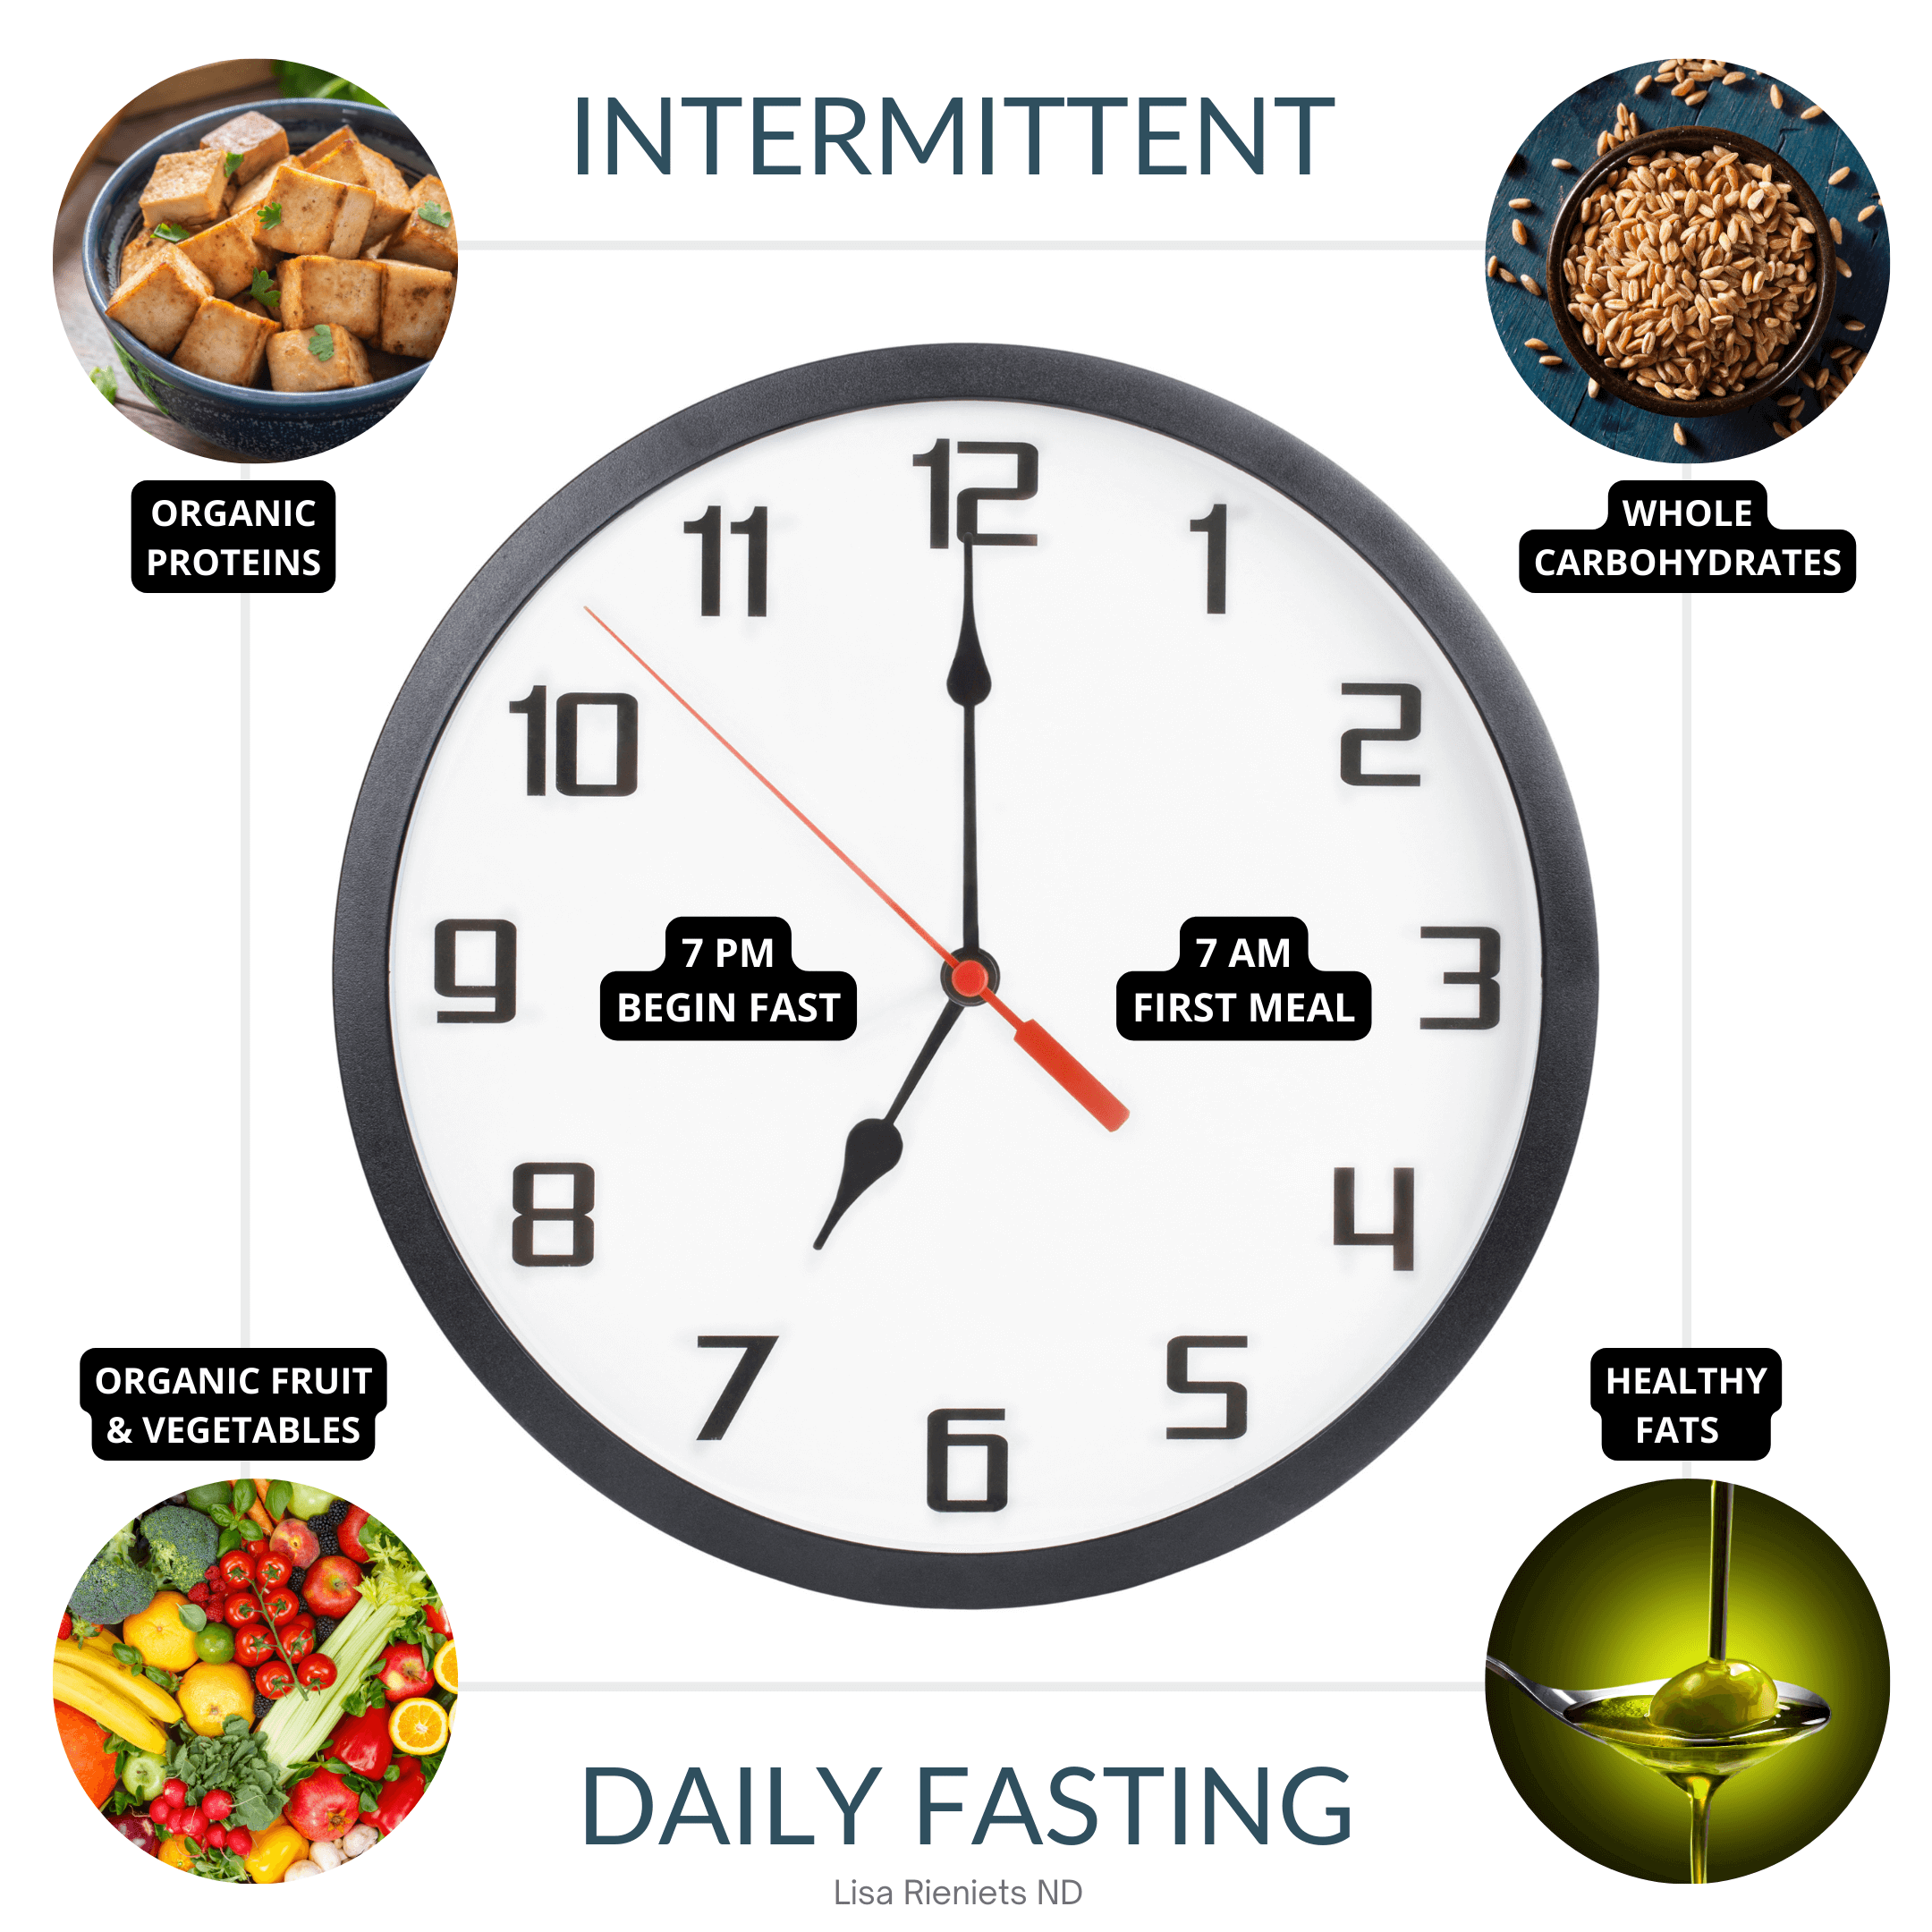 Intermittent fasting works for weight loss because it helps reset your fat, glucose, hormone, and protein metabolism.